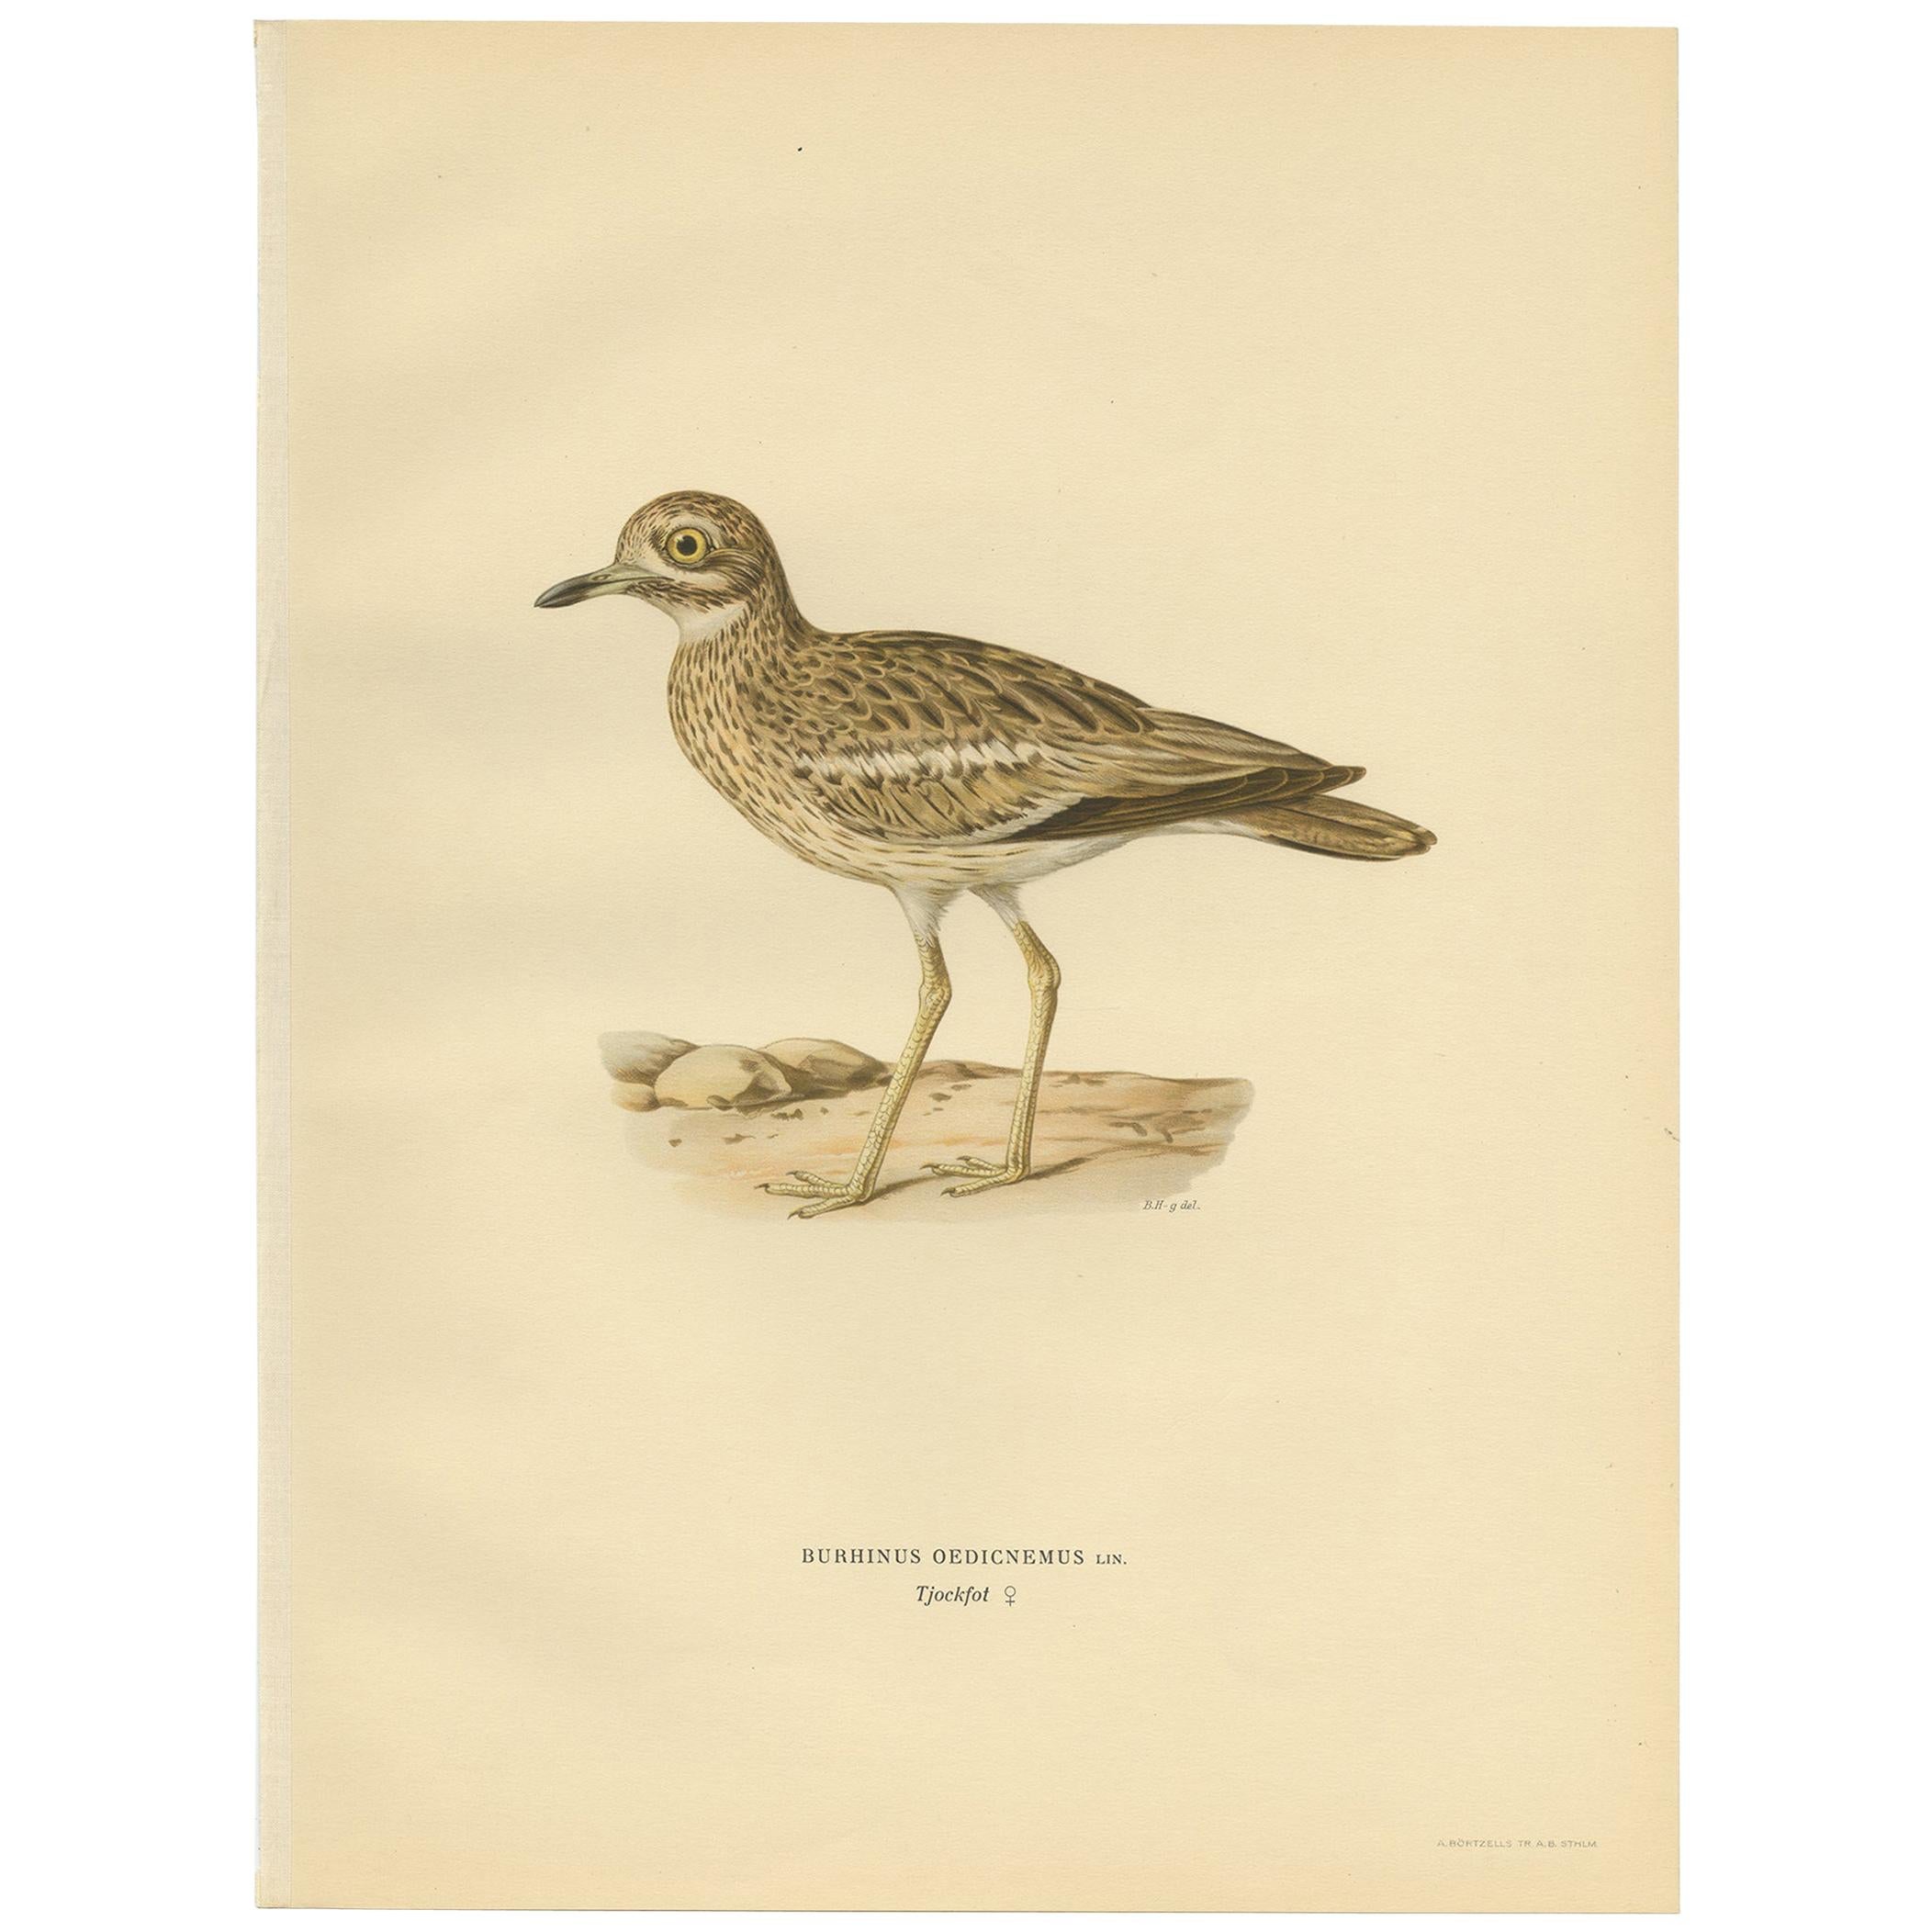 Antique Bird Print of the Eurasian Stone-Curlew by Von Wright, 1929